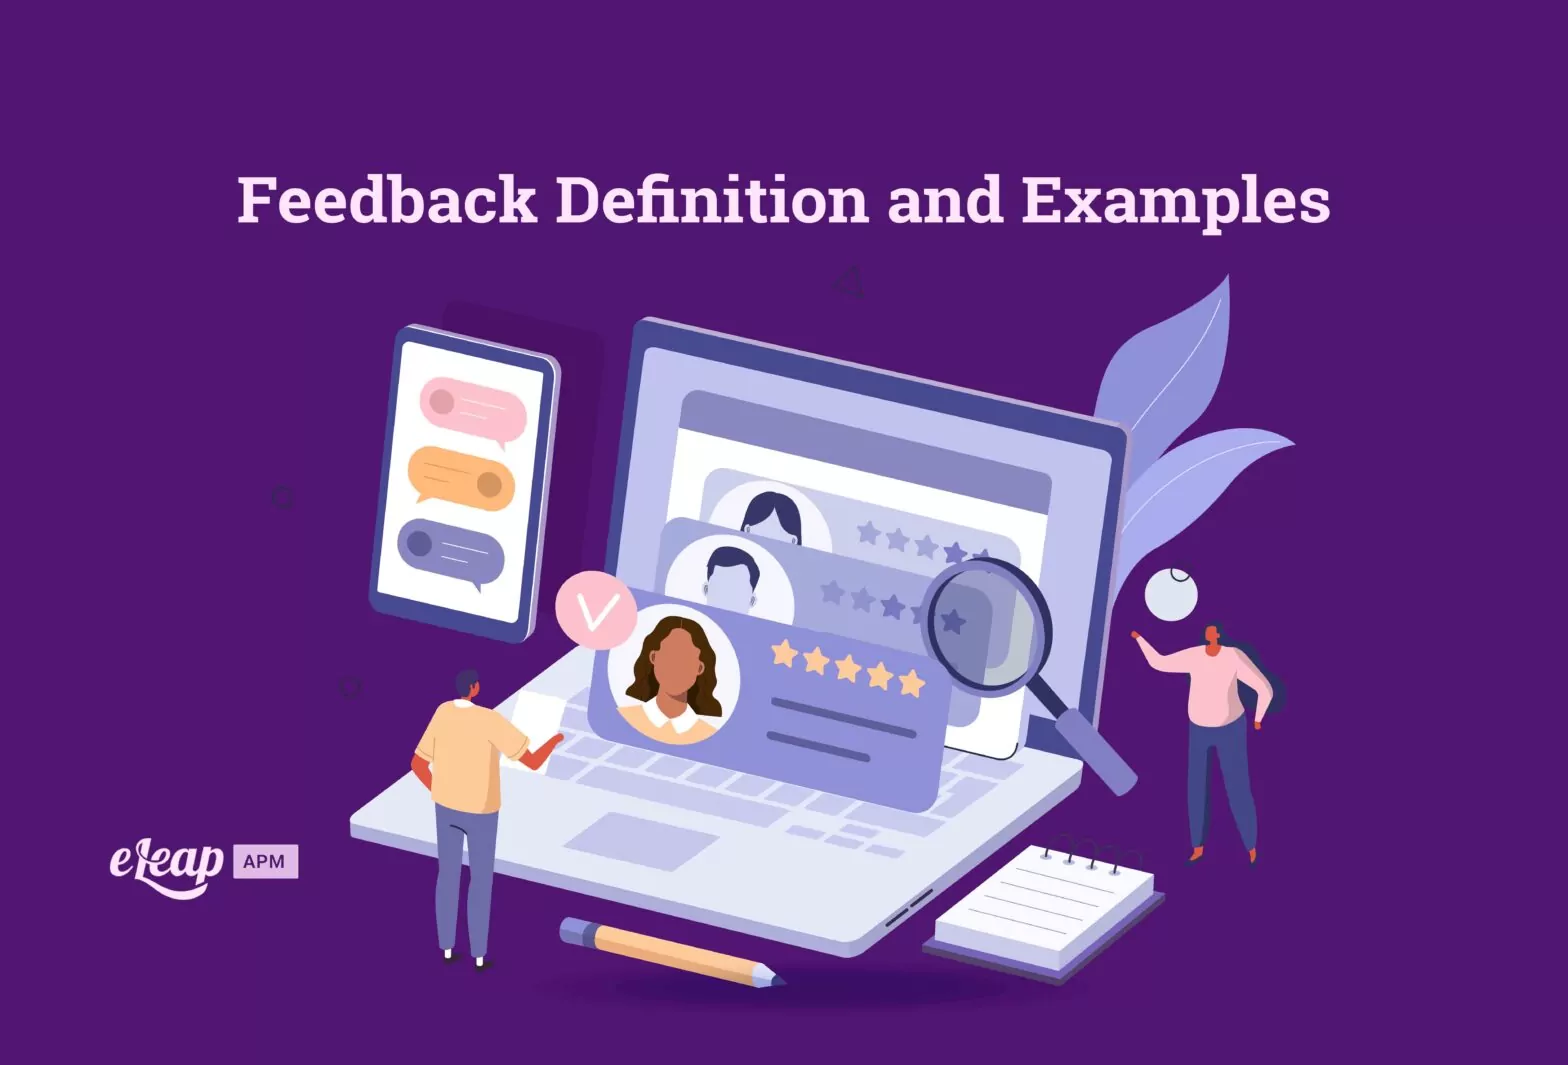 Feedback Definition and Examples